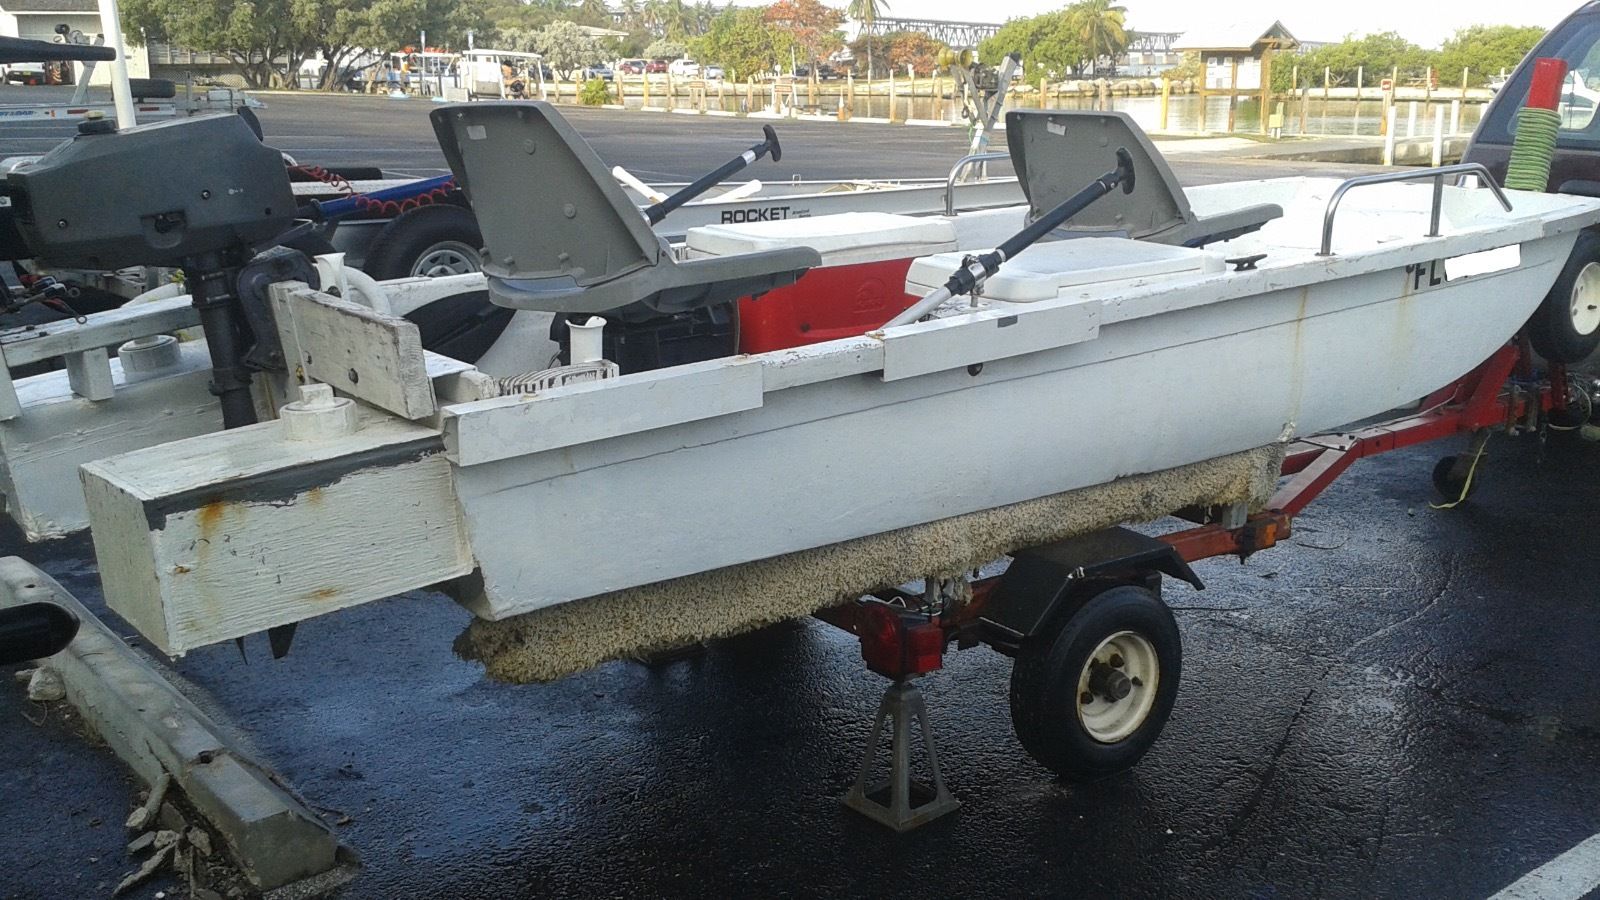 Homemade Fishing Boat 2013 for sale for $725 - Boats-from ...